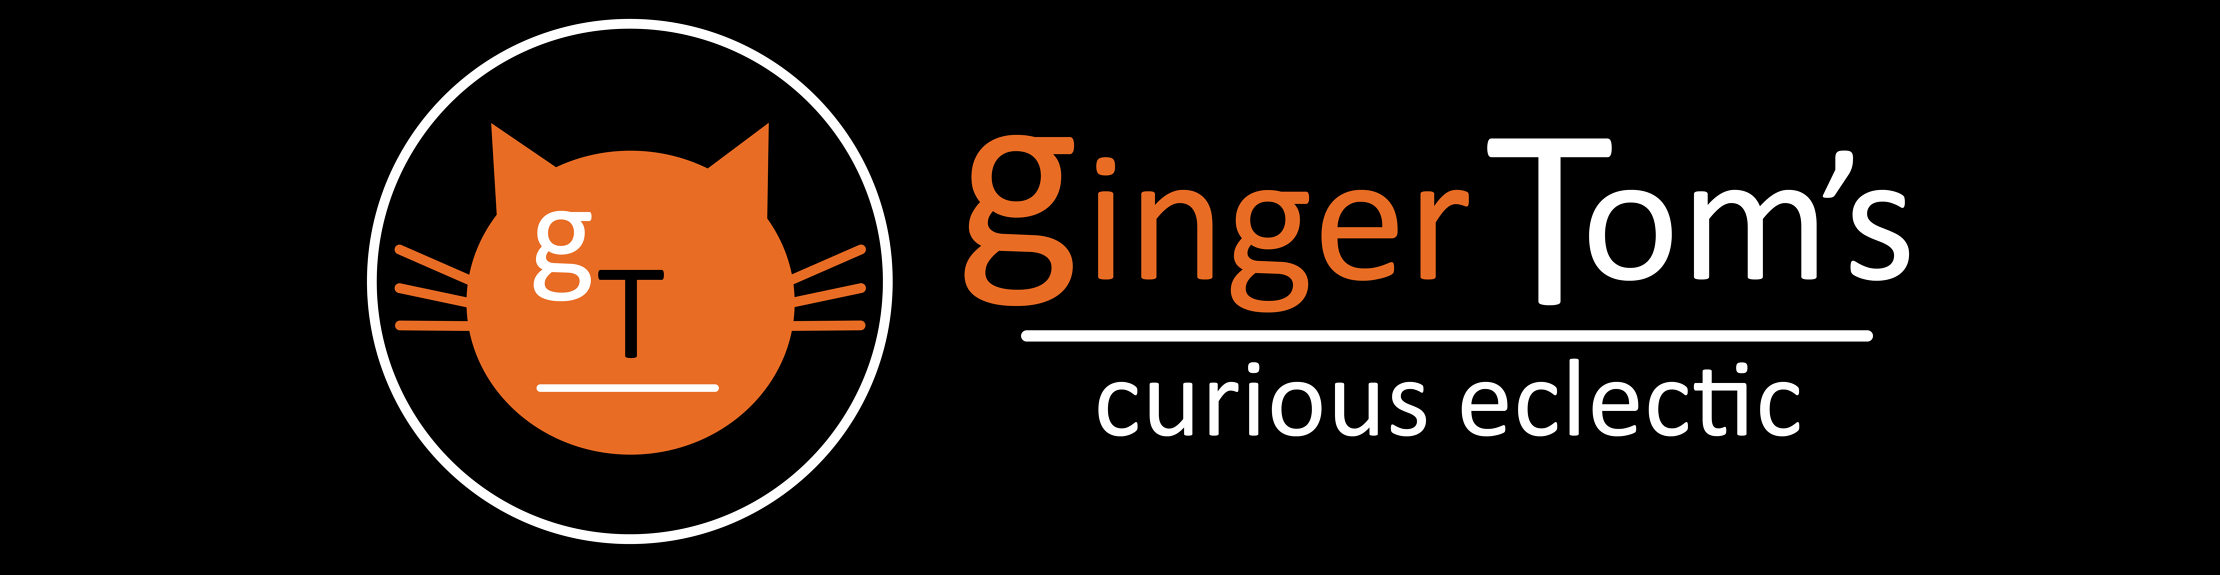 Ginger Tom's Curious Eclectic